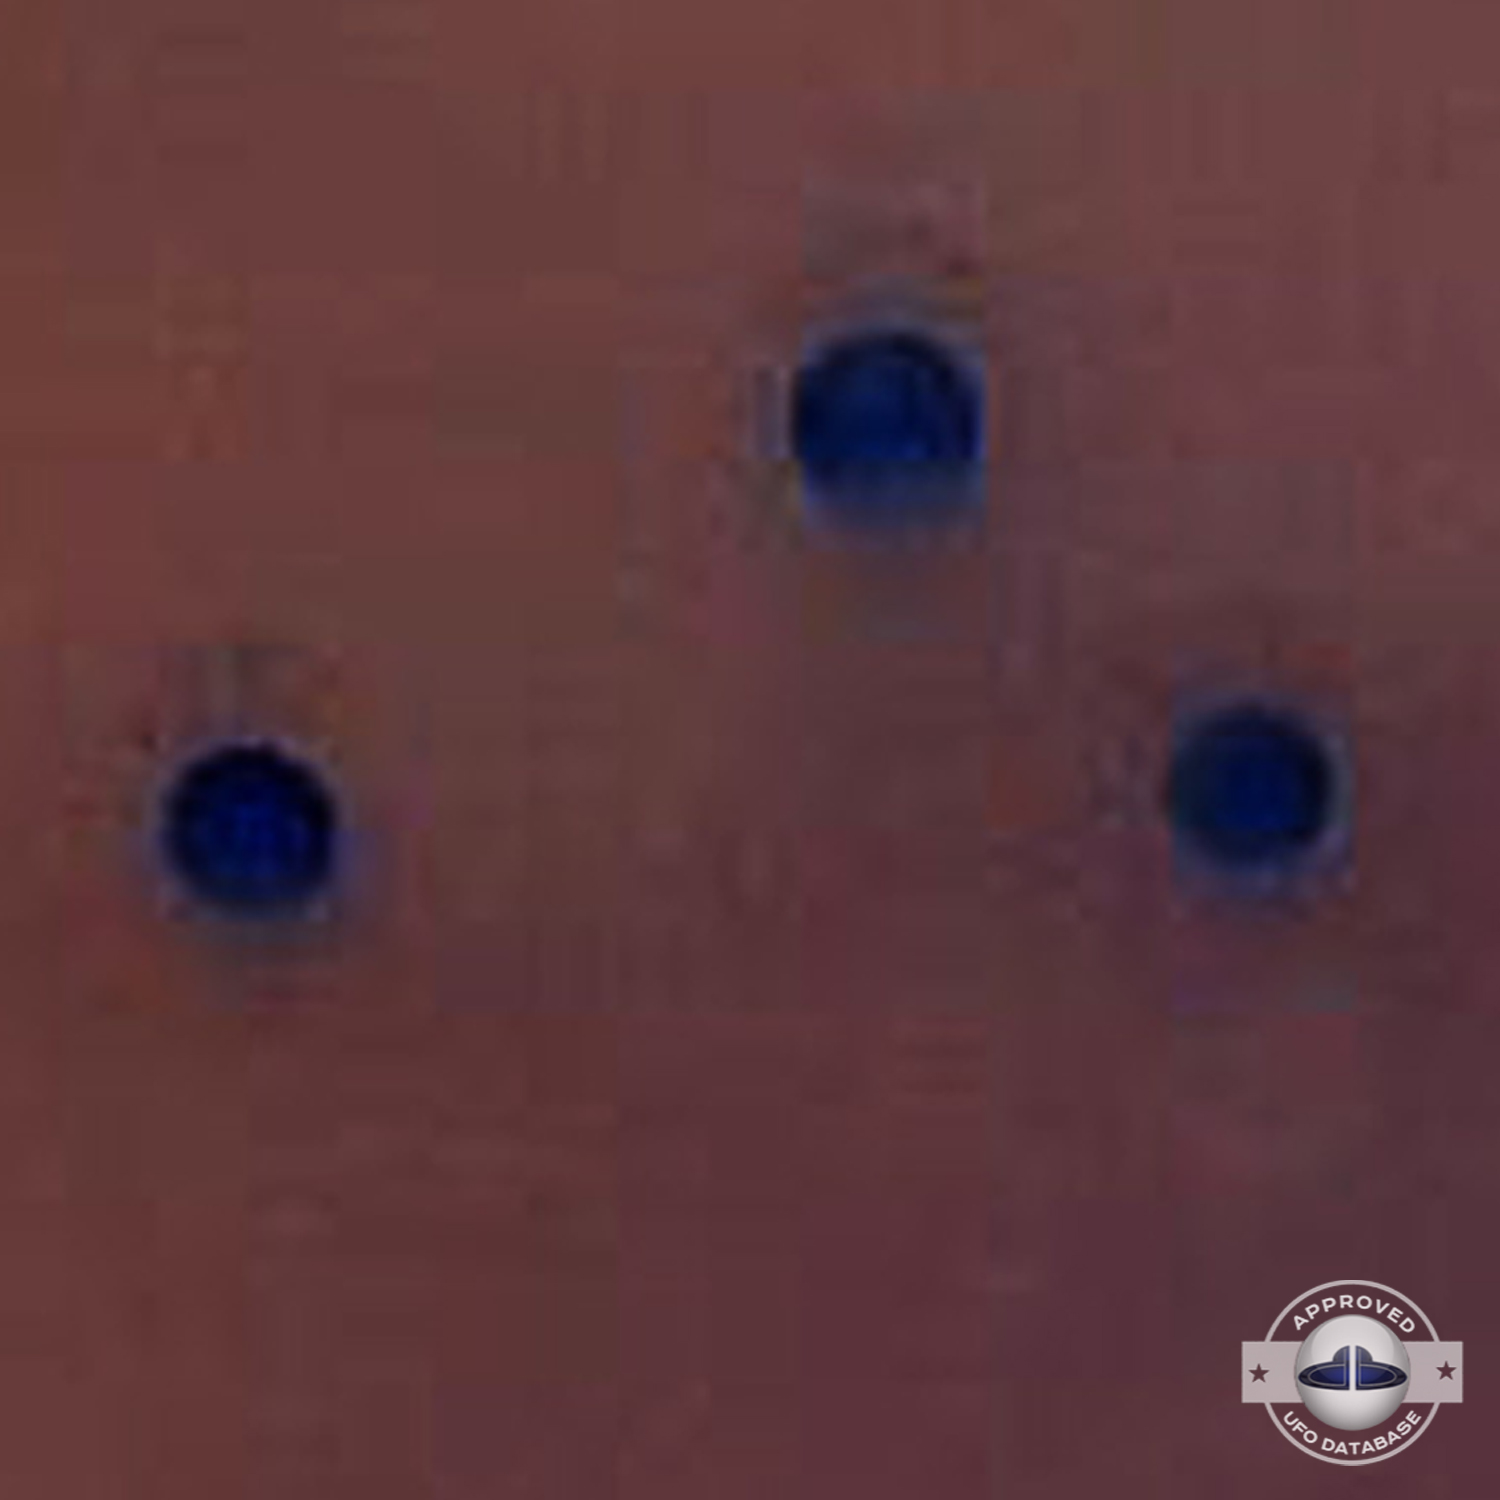 Citizens of Leshan saw 3 illuminated spherical shaped UFO in the sky UFO Picture #158-5